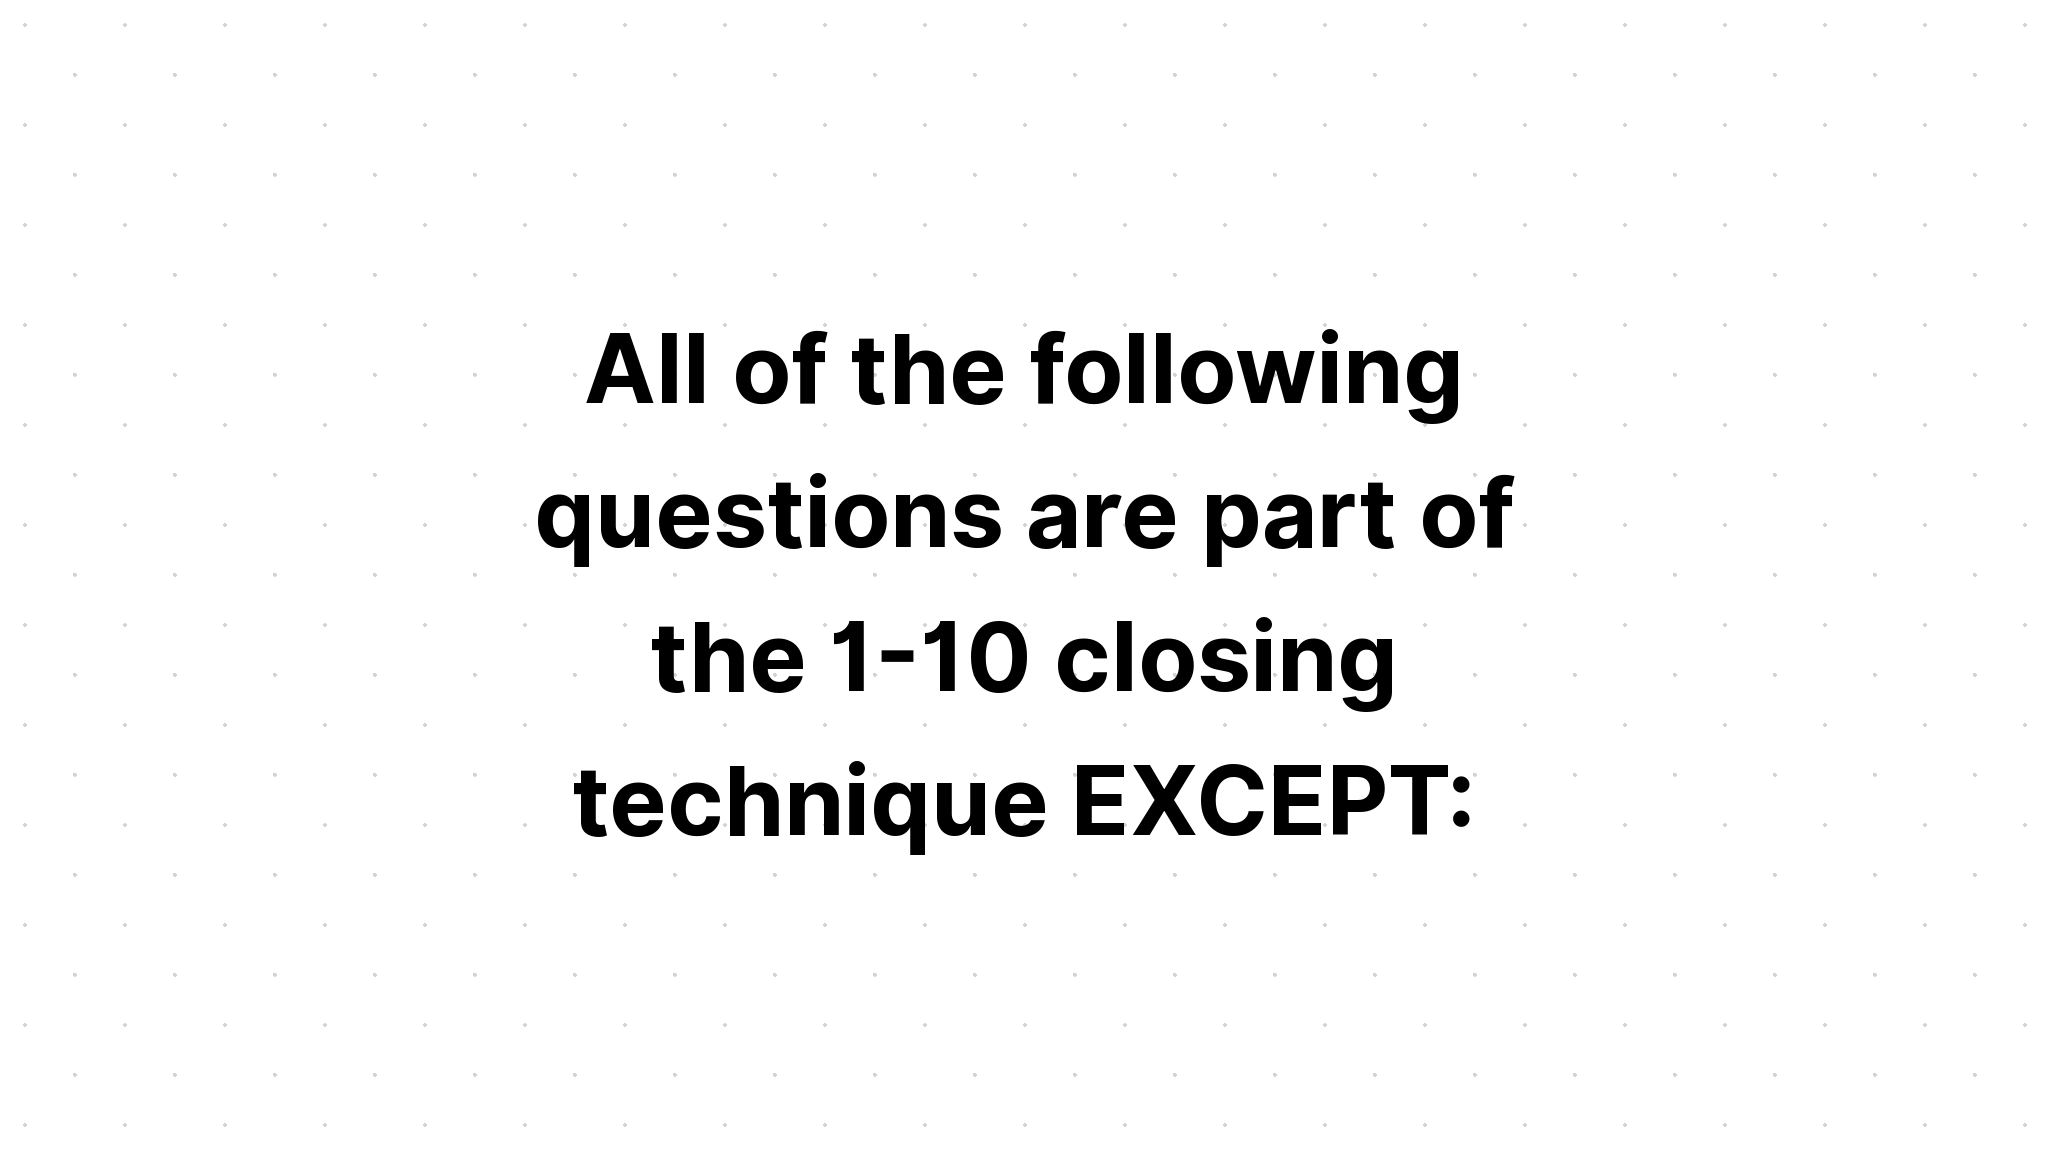 all-of-the-following-questions-are-part-of-the-1-10-closing-technique